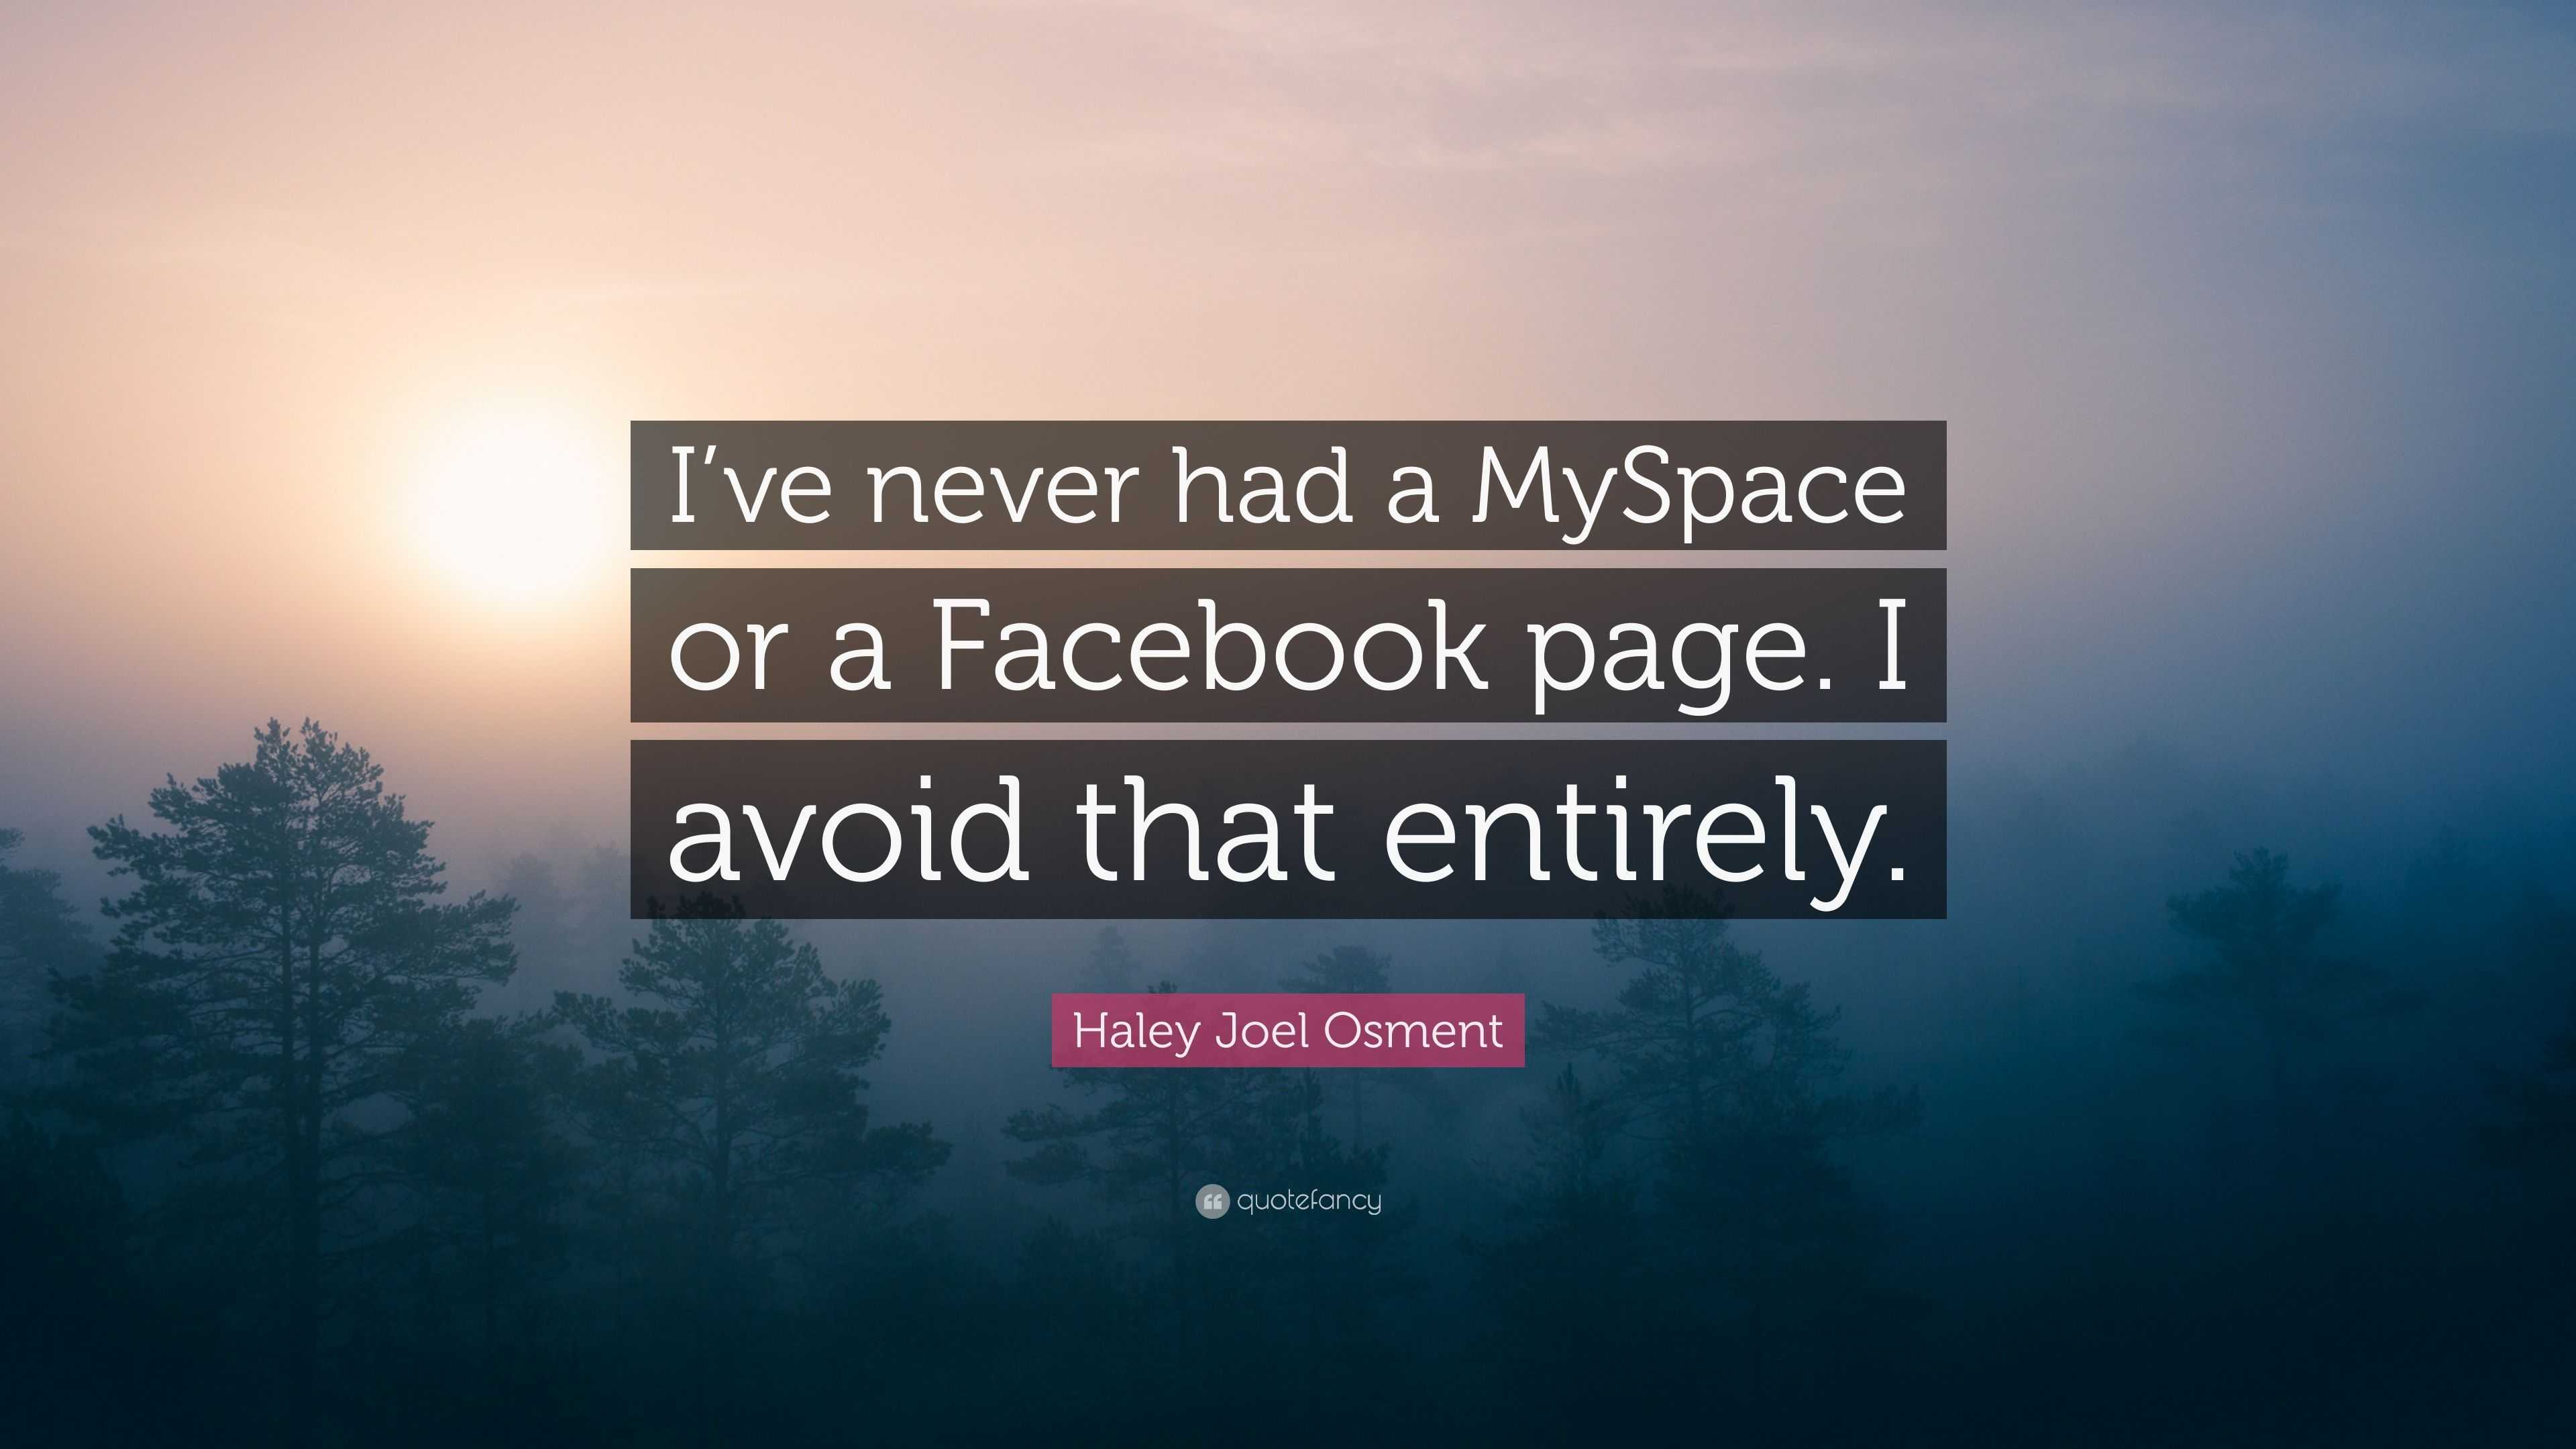 Haley Joel Osment Quote: “I’ve never had a MySpace or a Facebook page